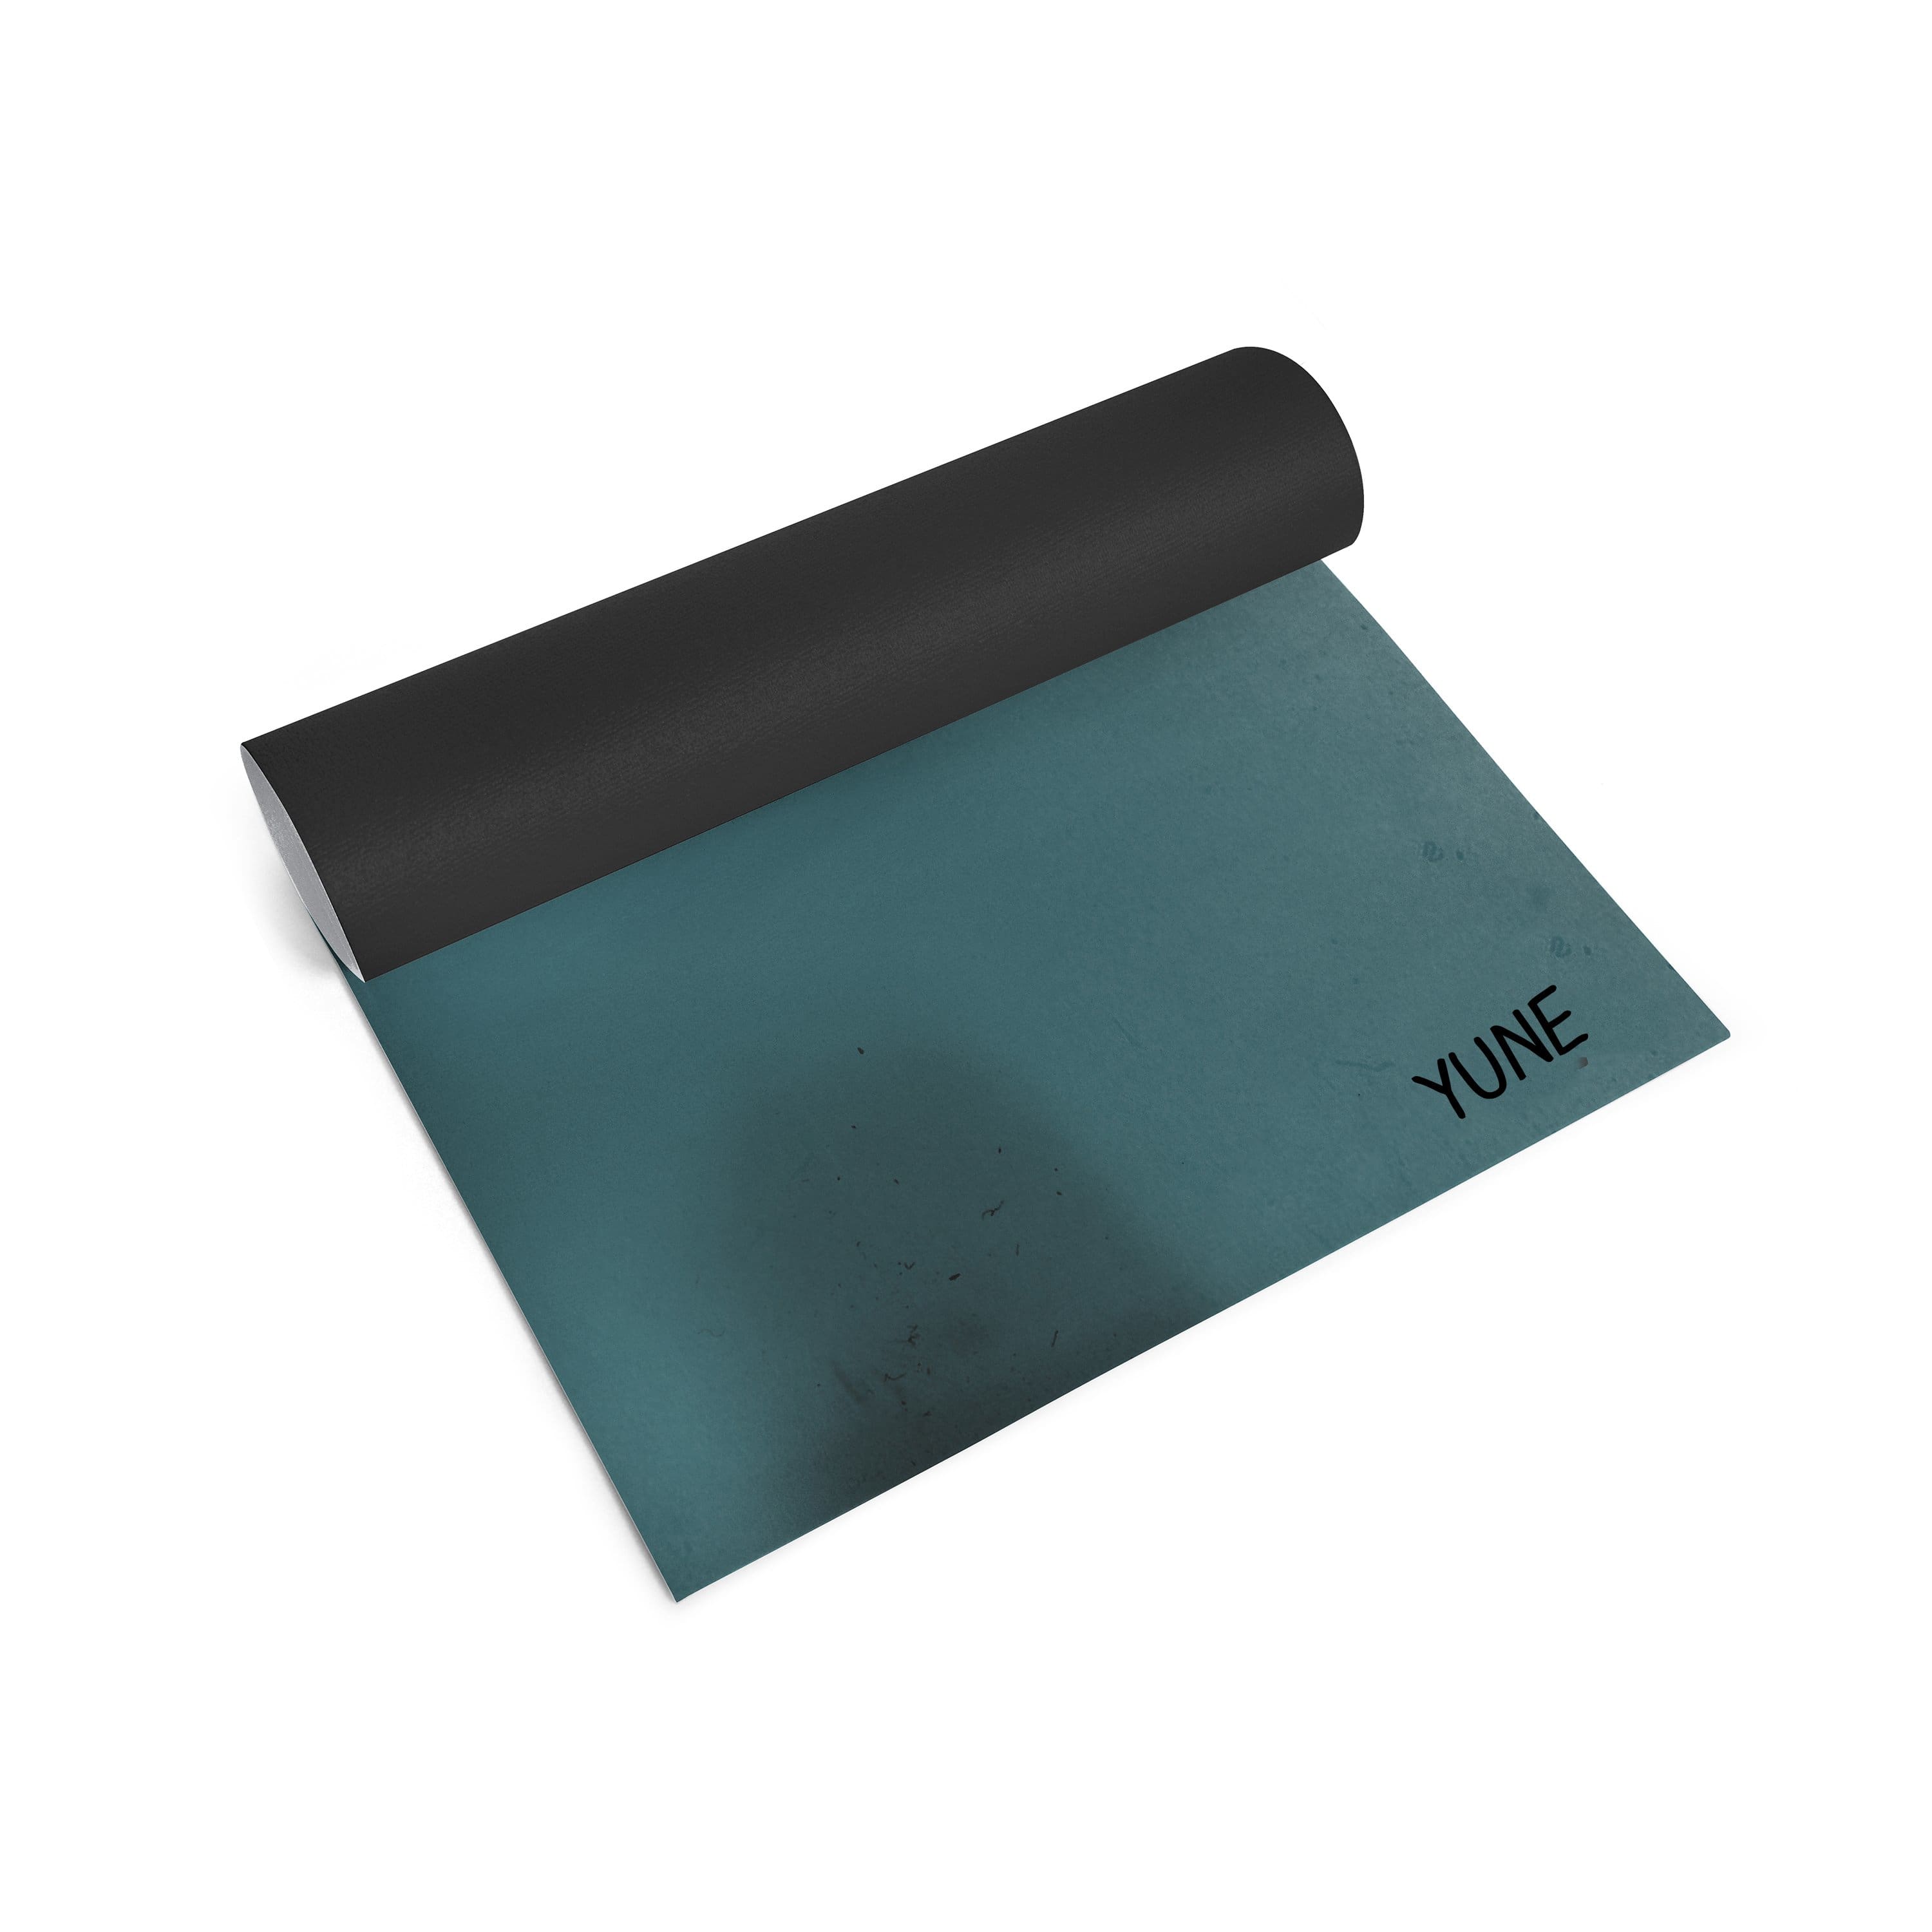 Hoth Yoga Mat - Yoga Mat - Yeti Yoga Co. - cotton, excercise, fitness, fitness product, health